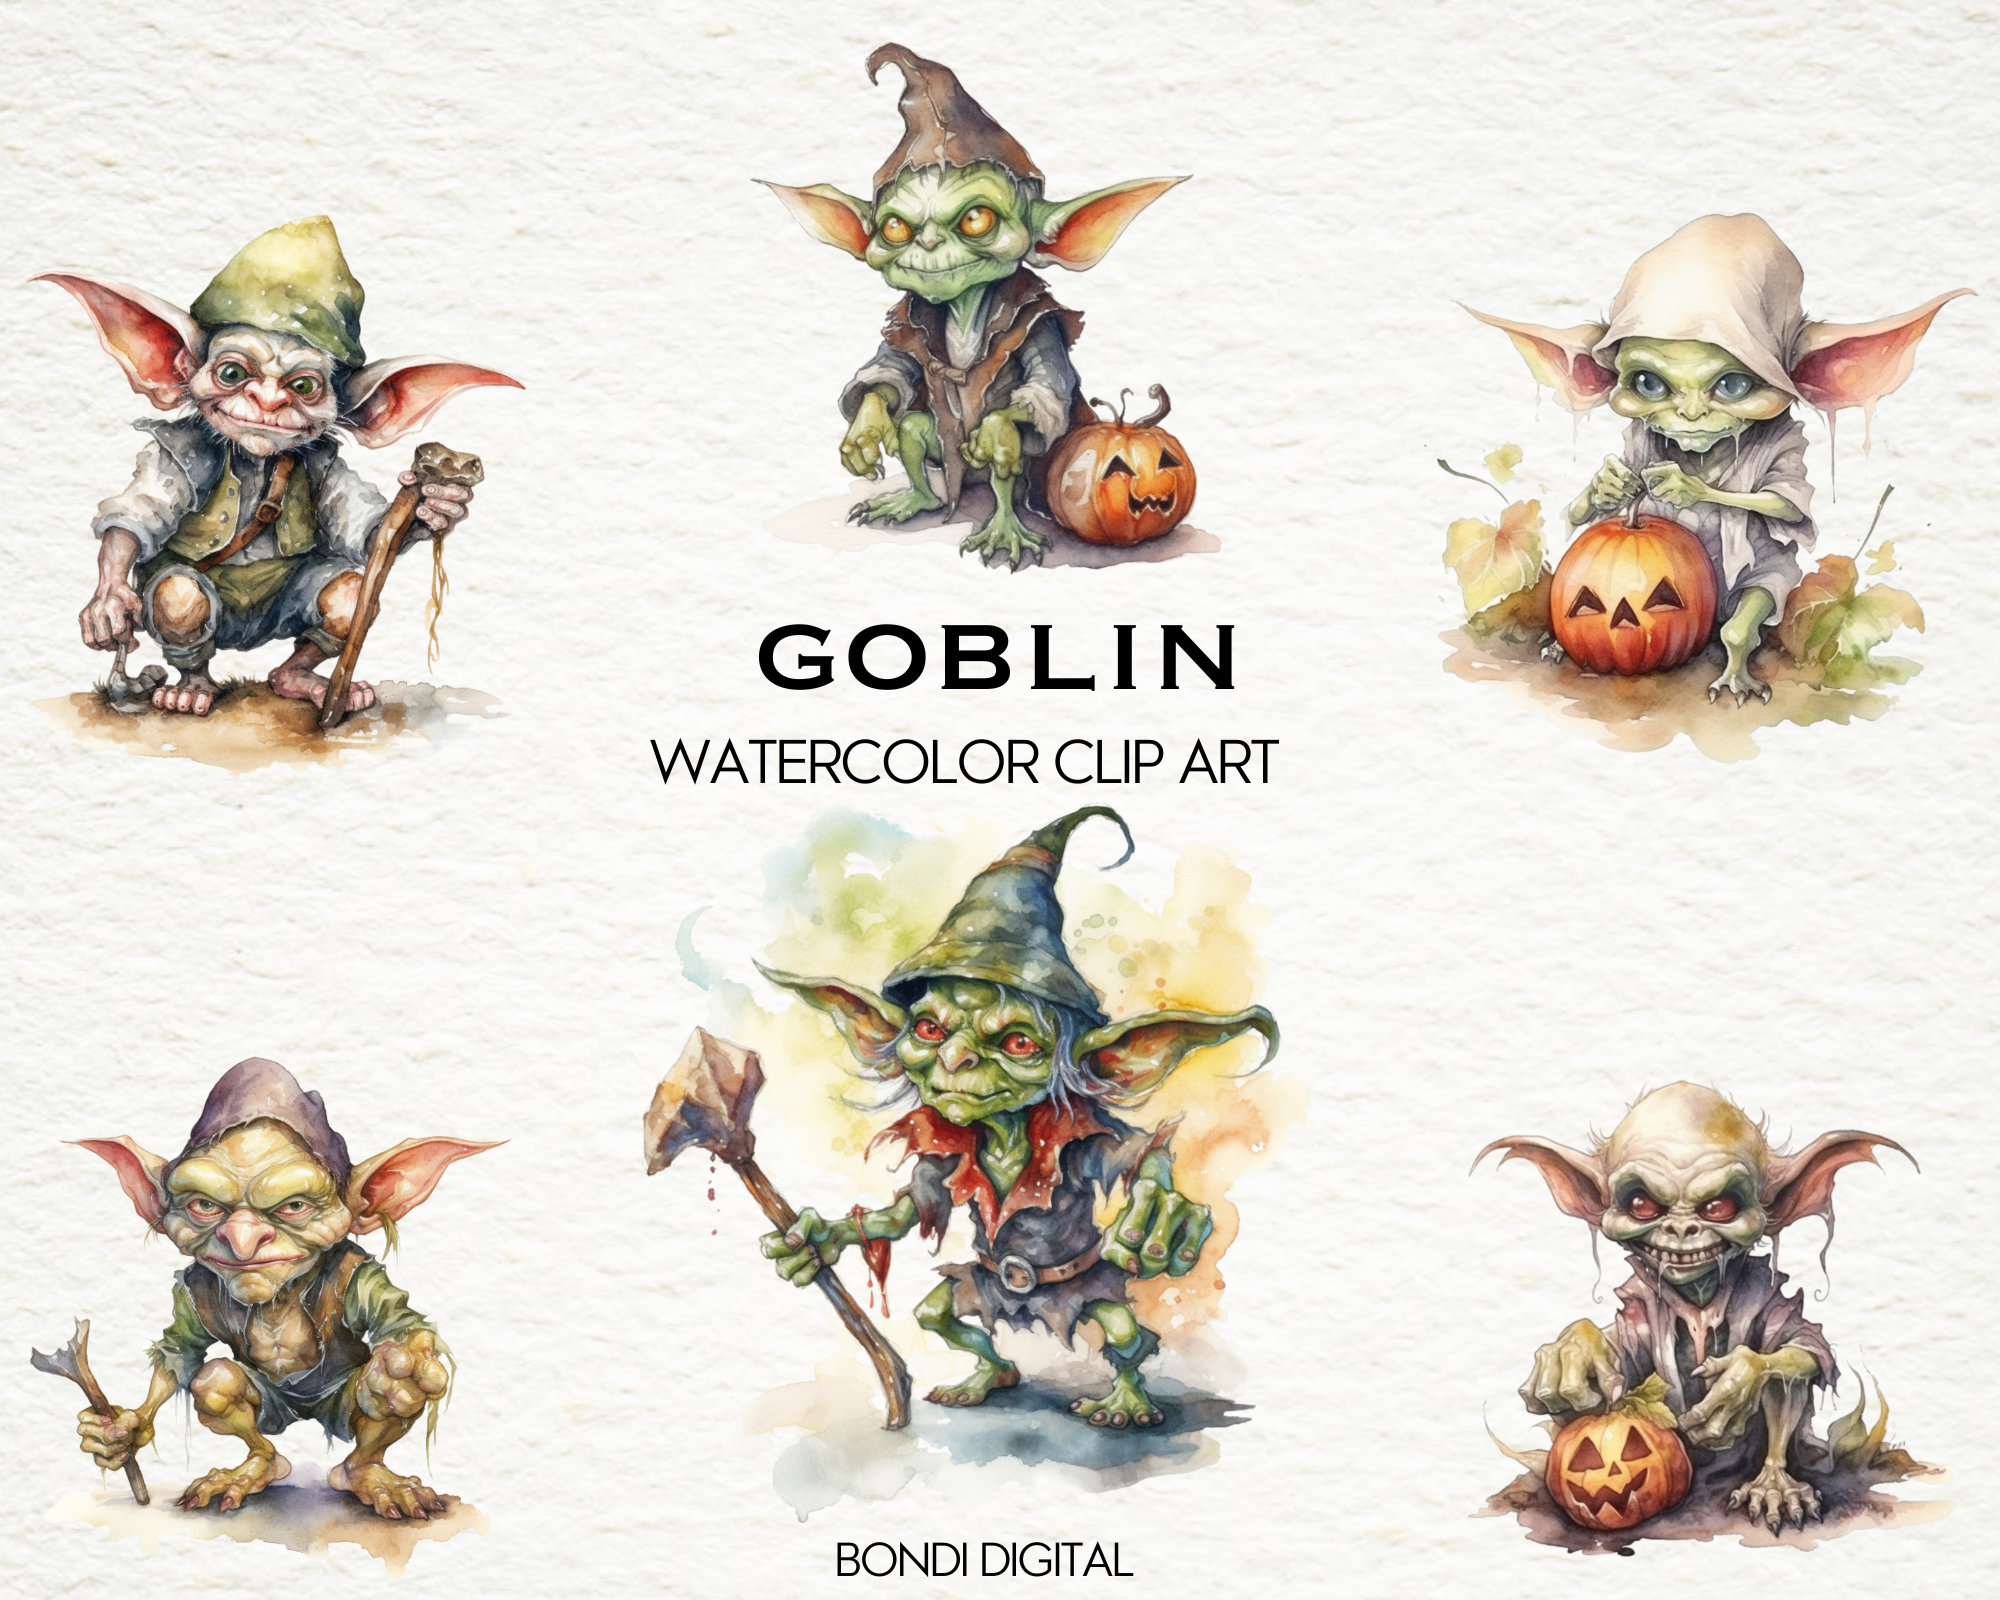 Goblin Potion Halloween Printables and Straw Toppers - Clean and